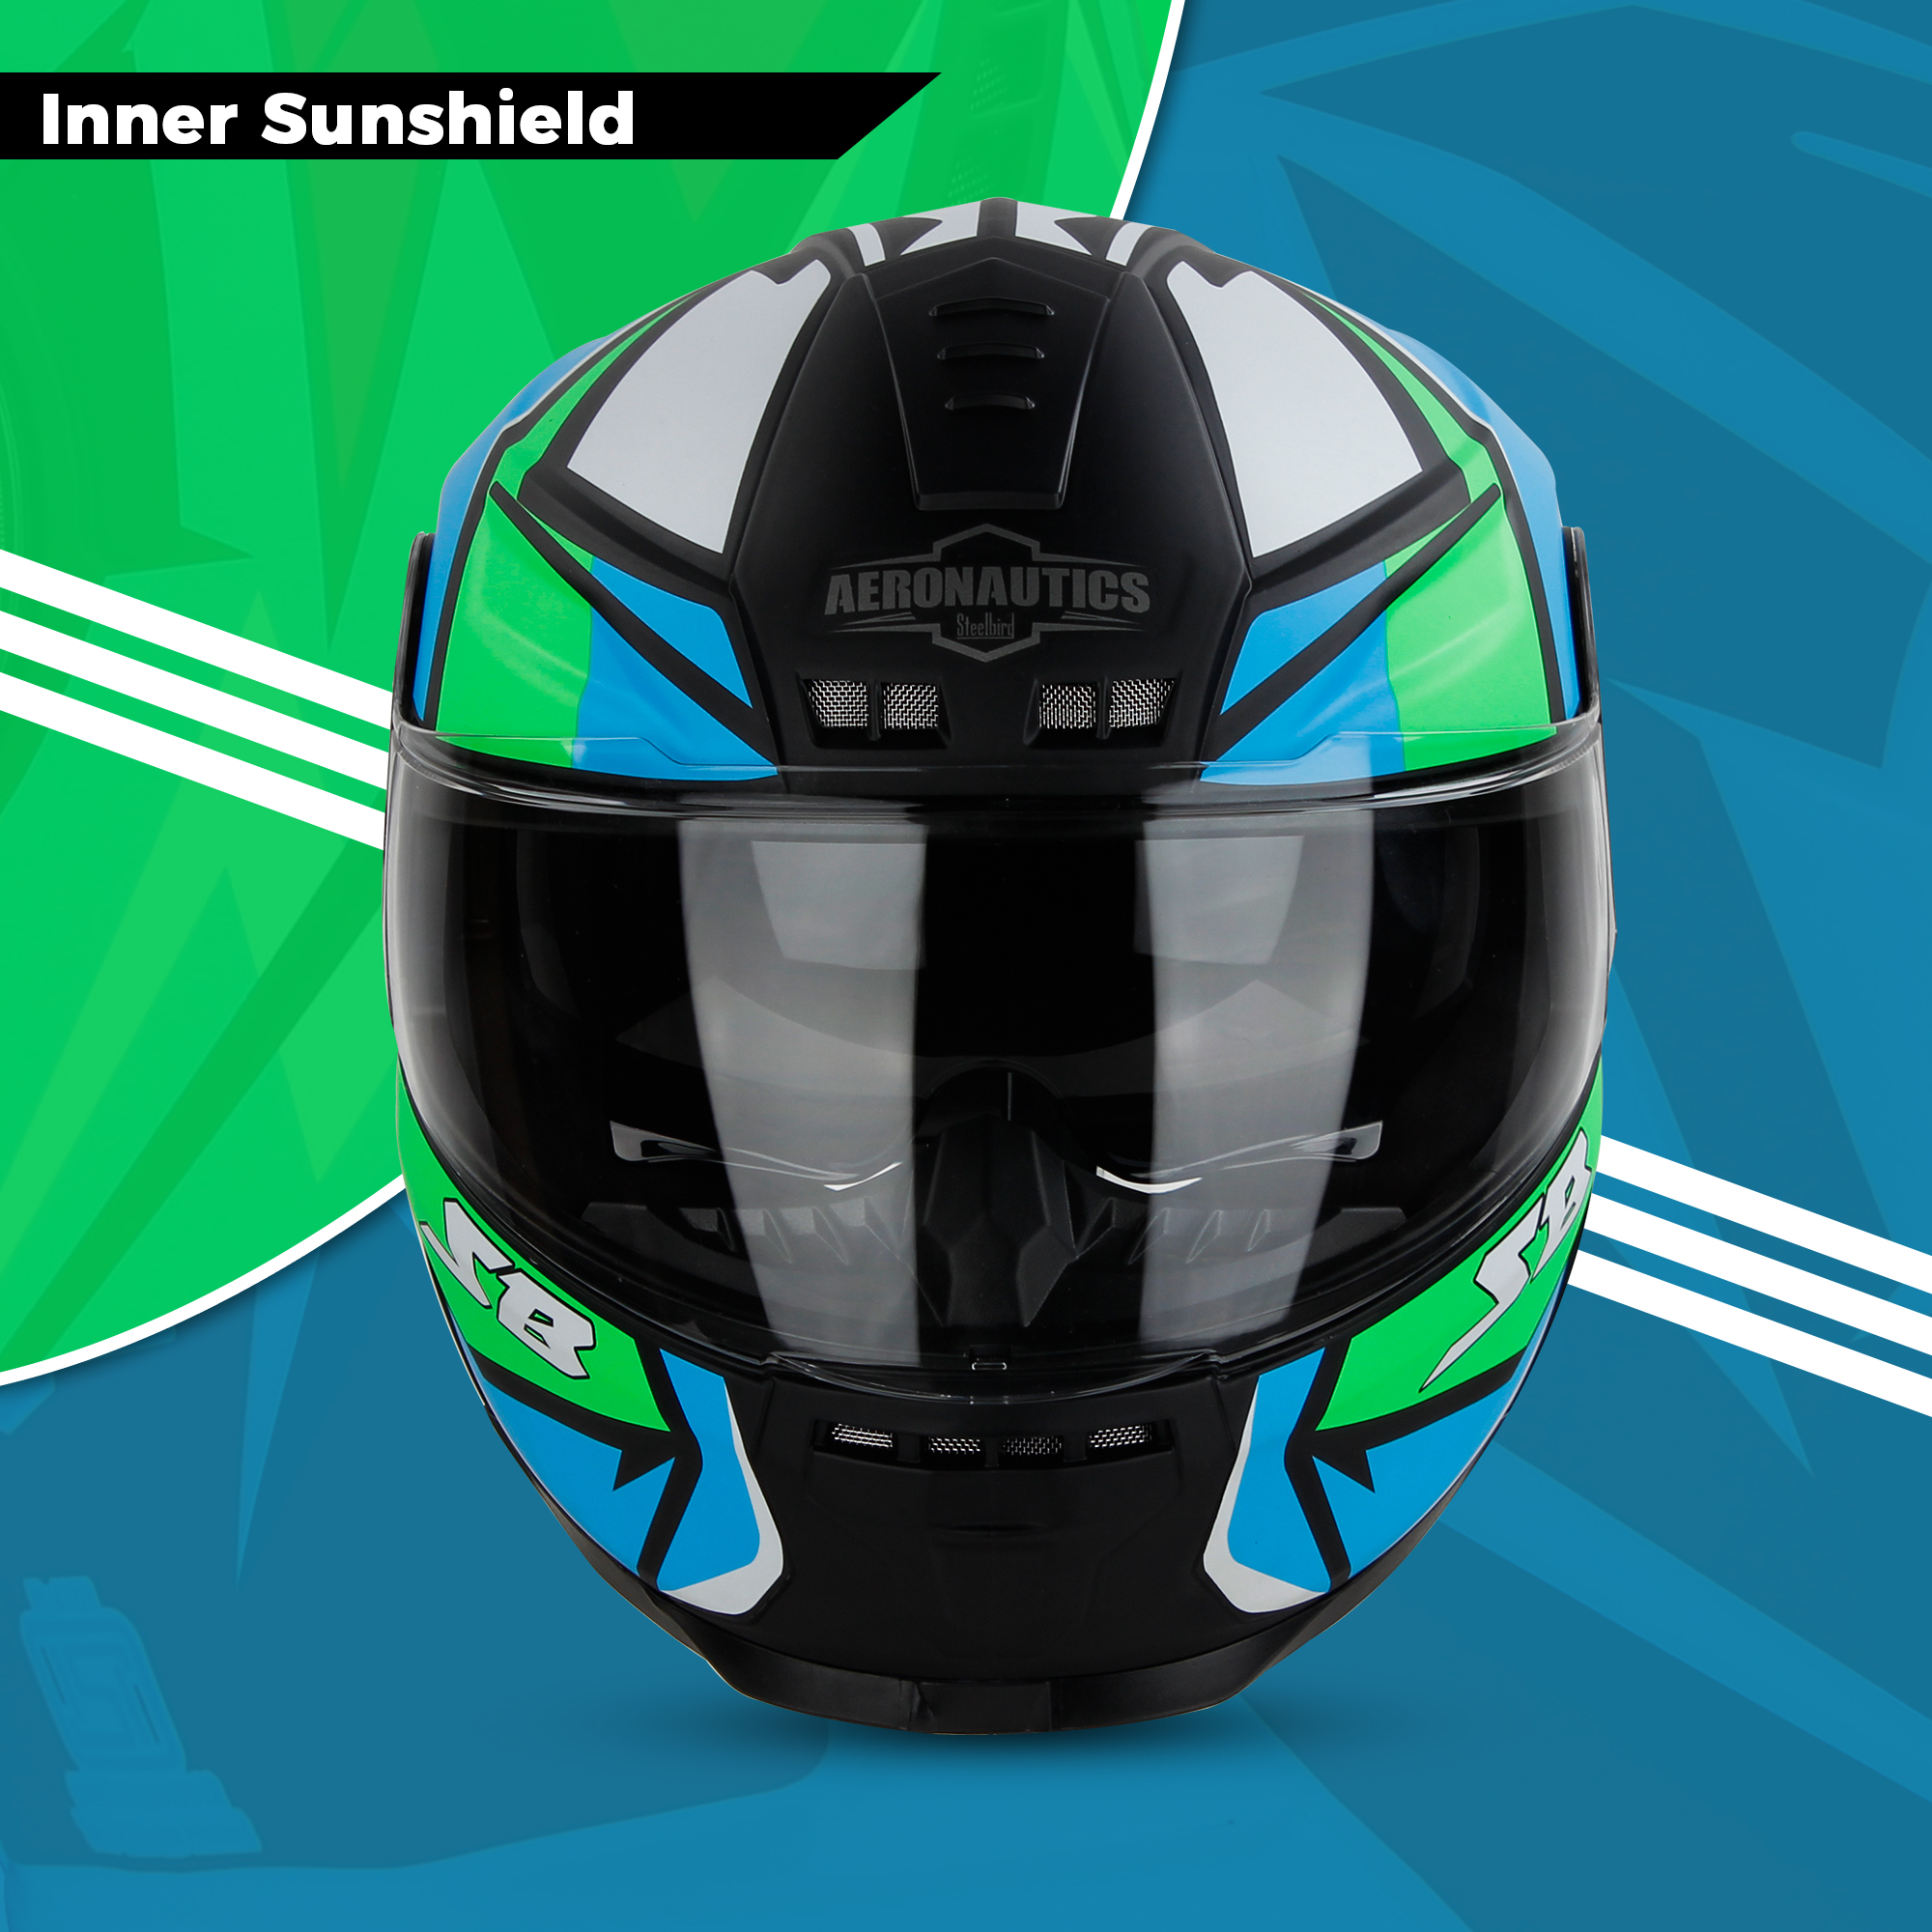 Steelbird SBH-40 Decode ISI Certified Full Face Graphic Helmet For Men And Women With Inner Sun Shield (Glossy Black Green)